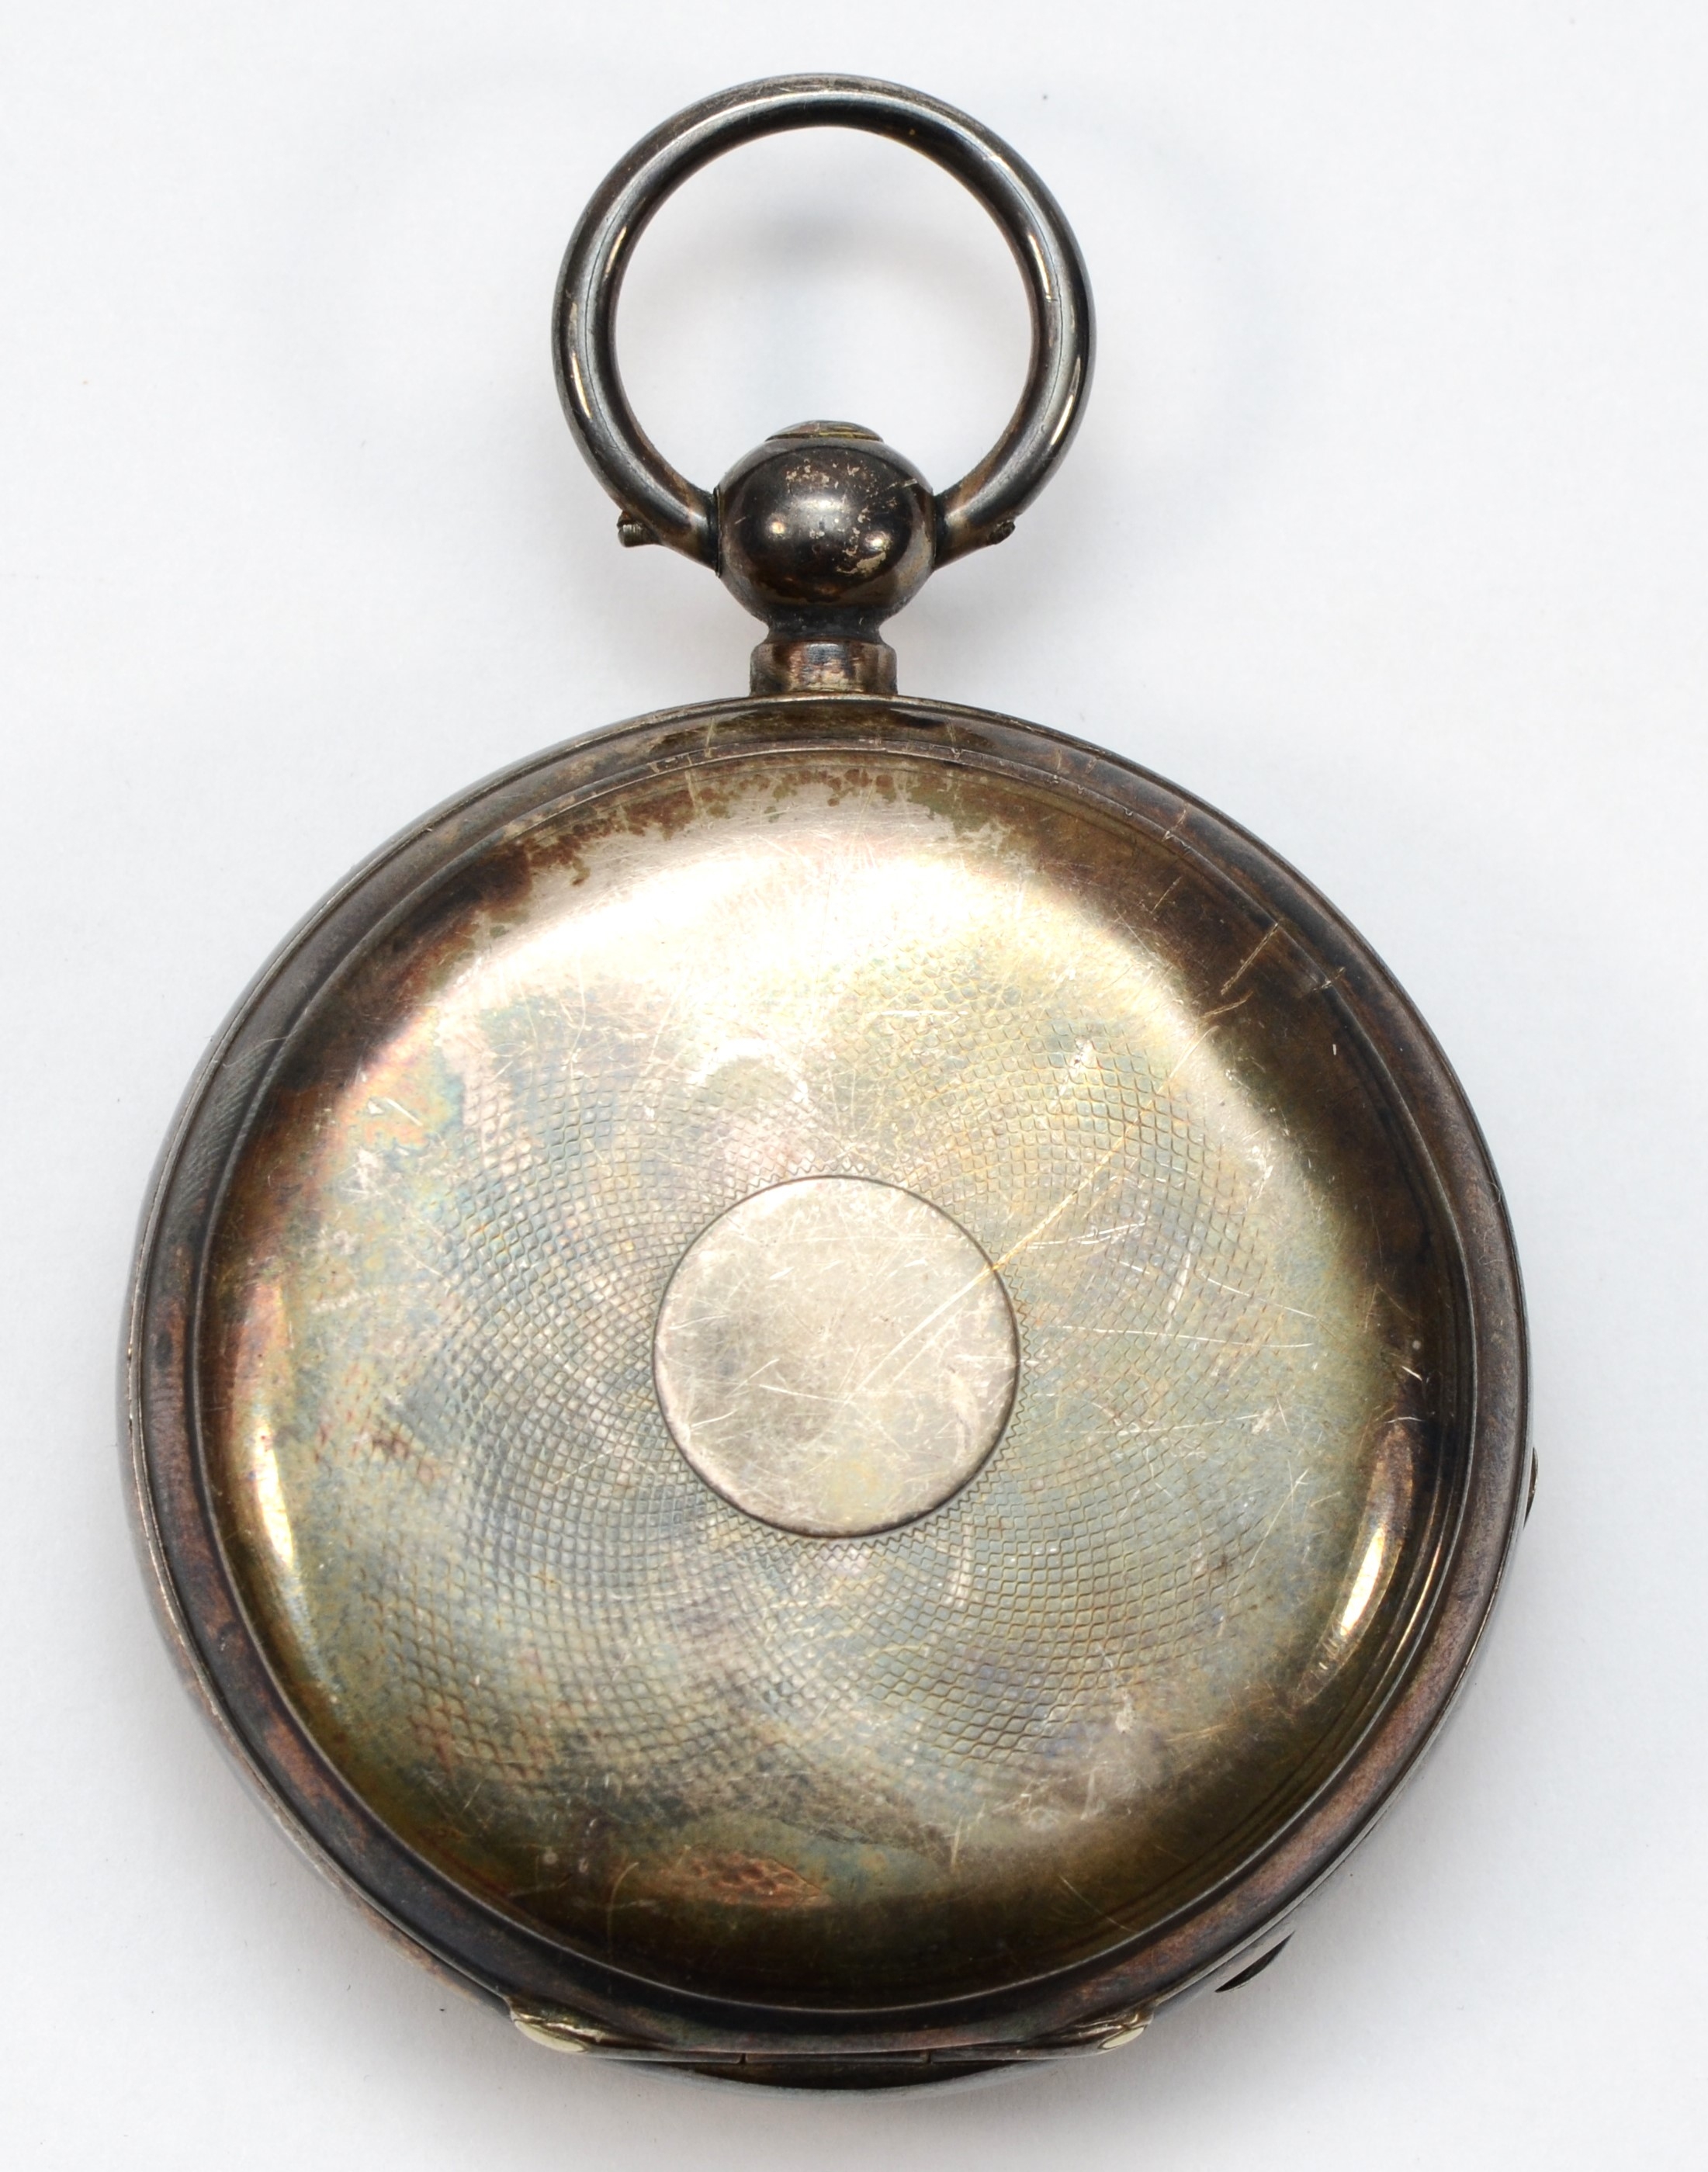 Dominion Watch Co., a silver open face key wind pocket watch, Birmingham 1884, signed and numbered - Image 2 of 3